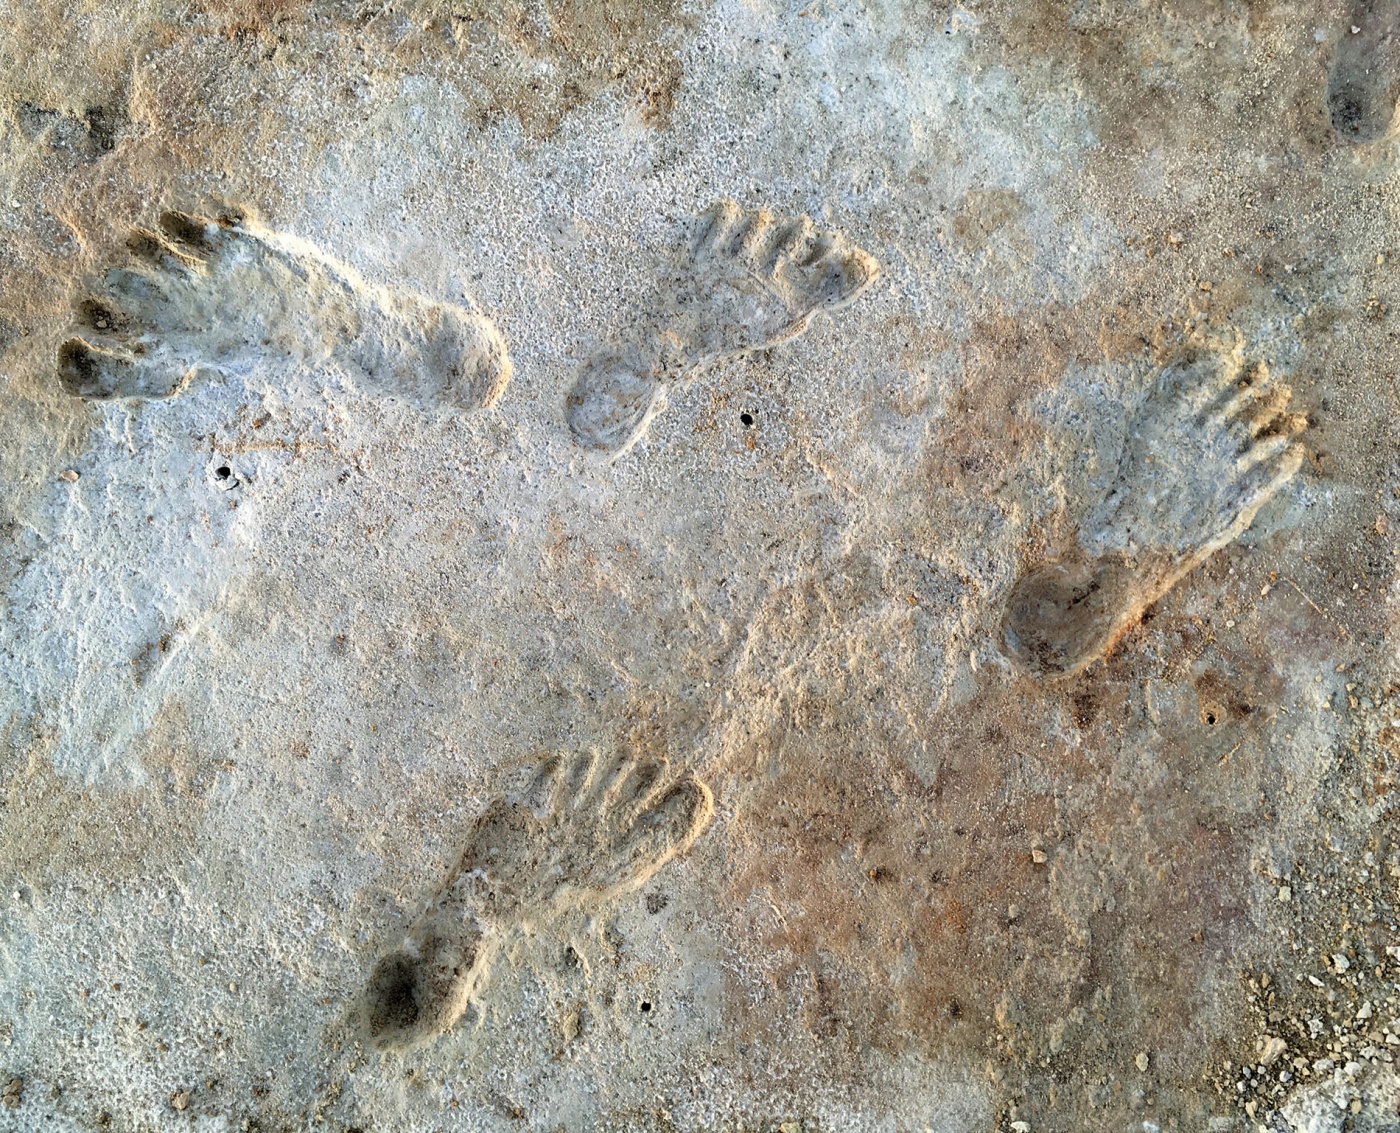 Image of ancient footprints in New Mexico